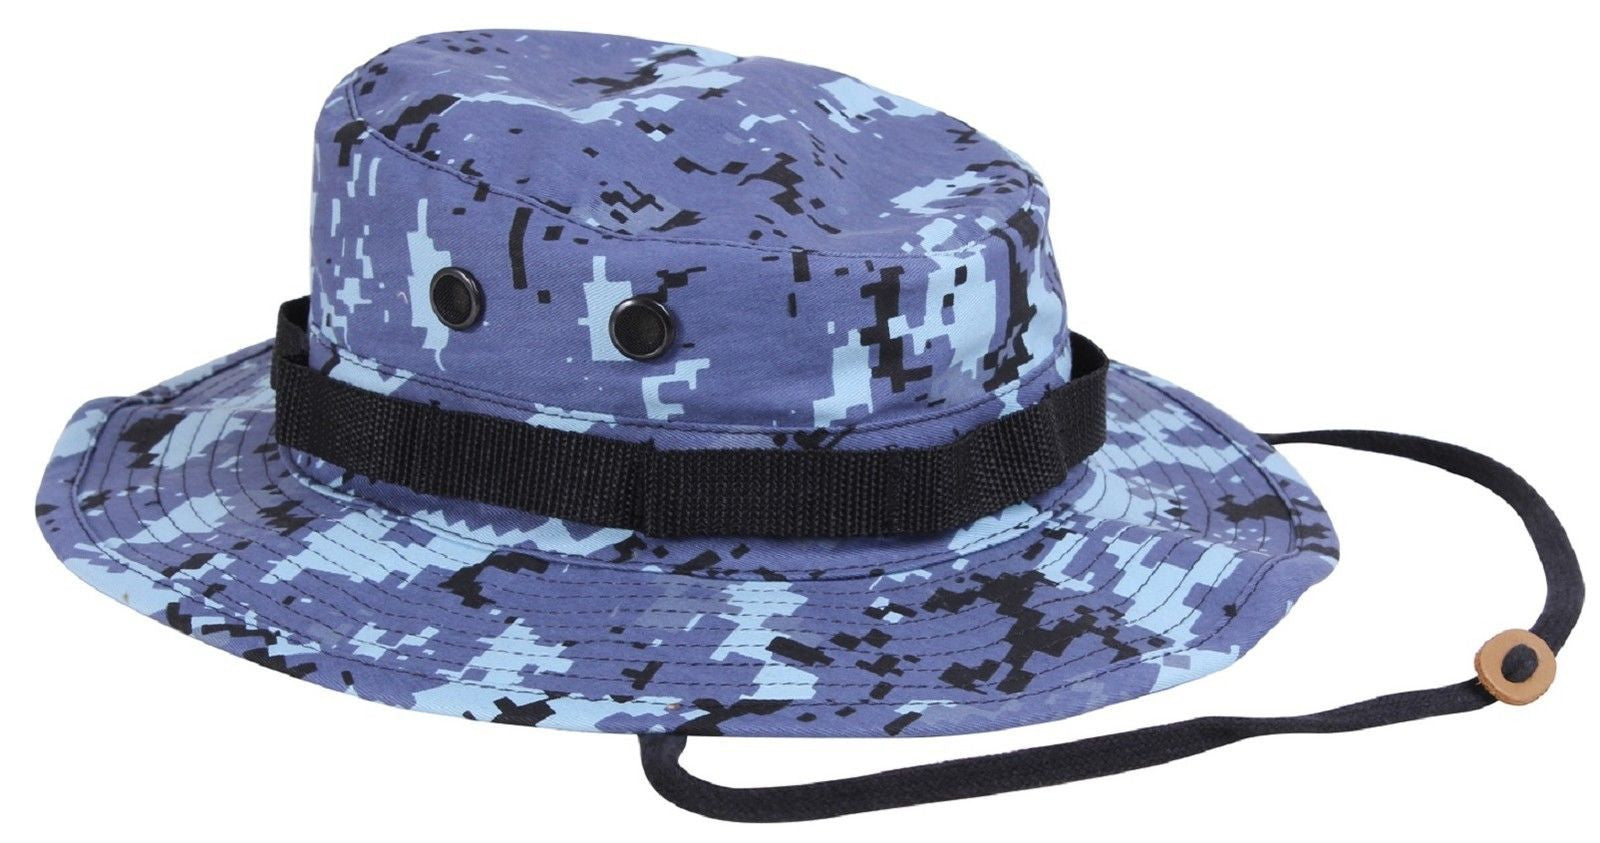 Digital Camouflage Boonie Hat - Rothco Bucket Blue or Red Digital